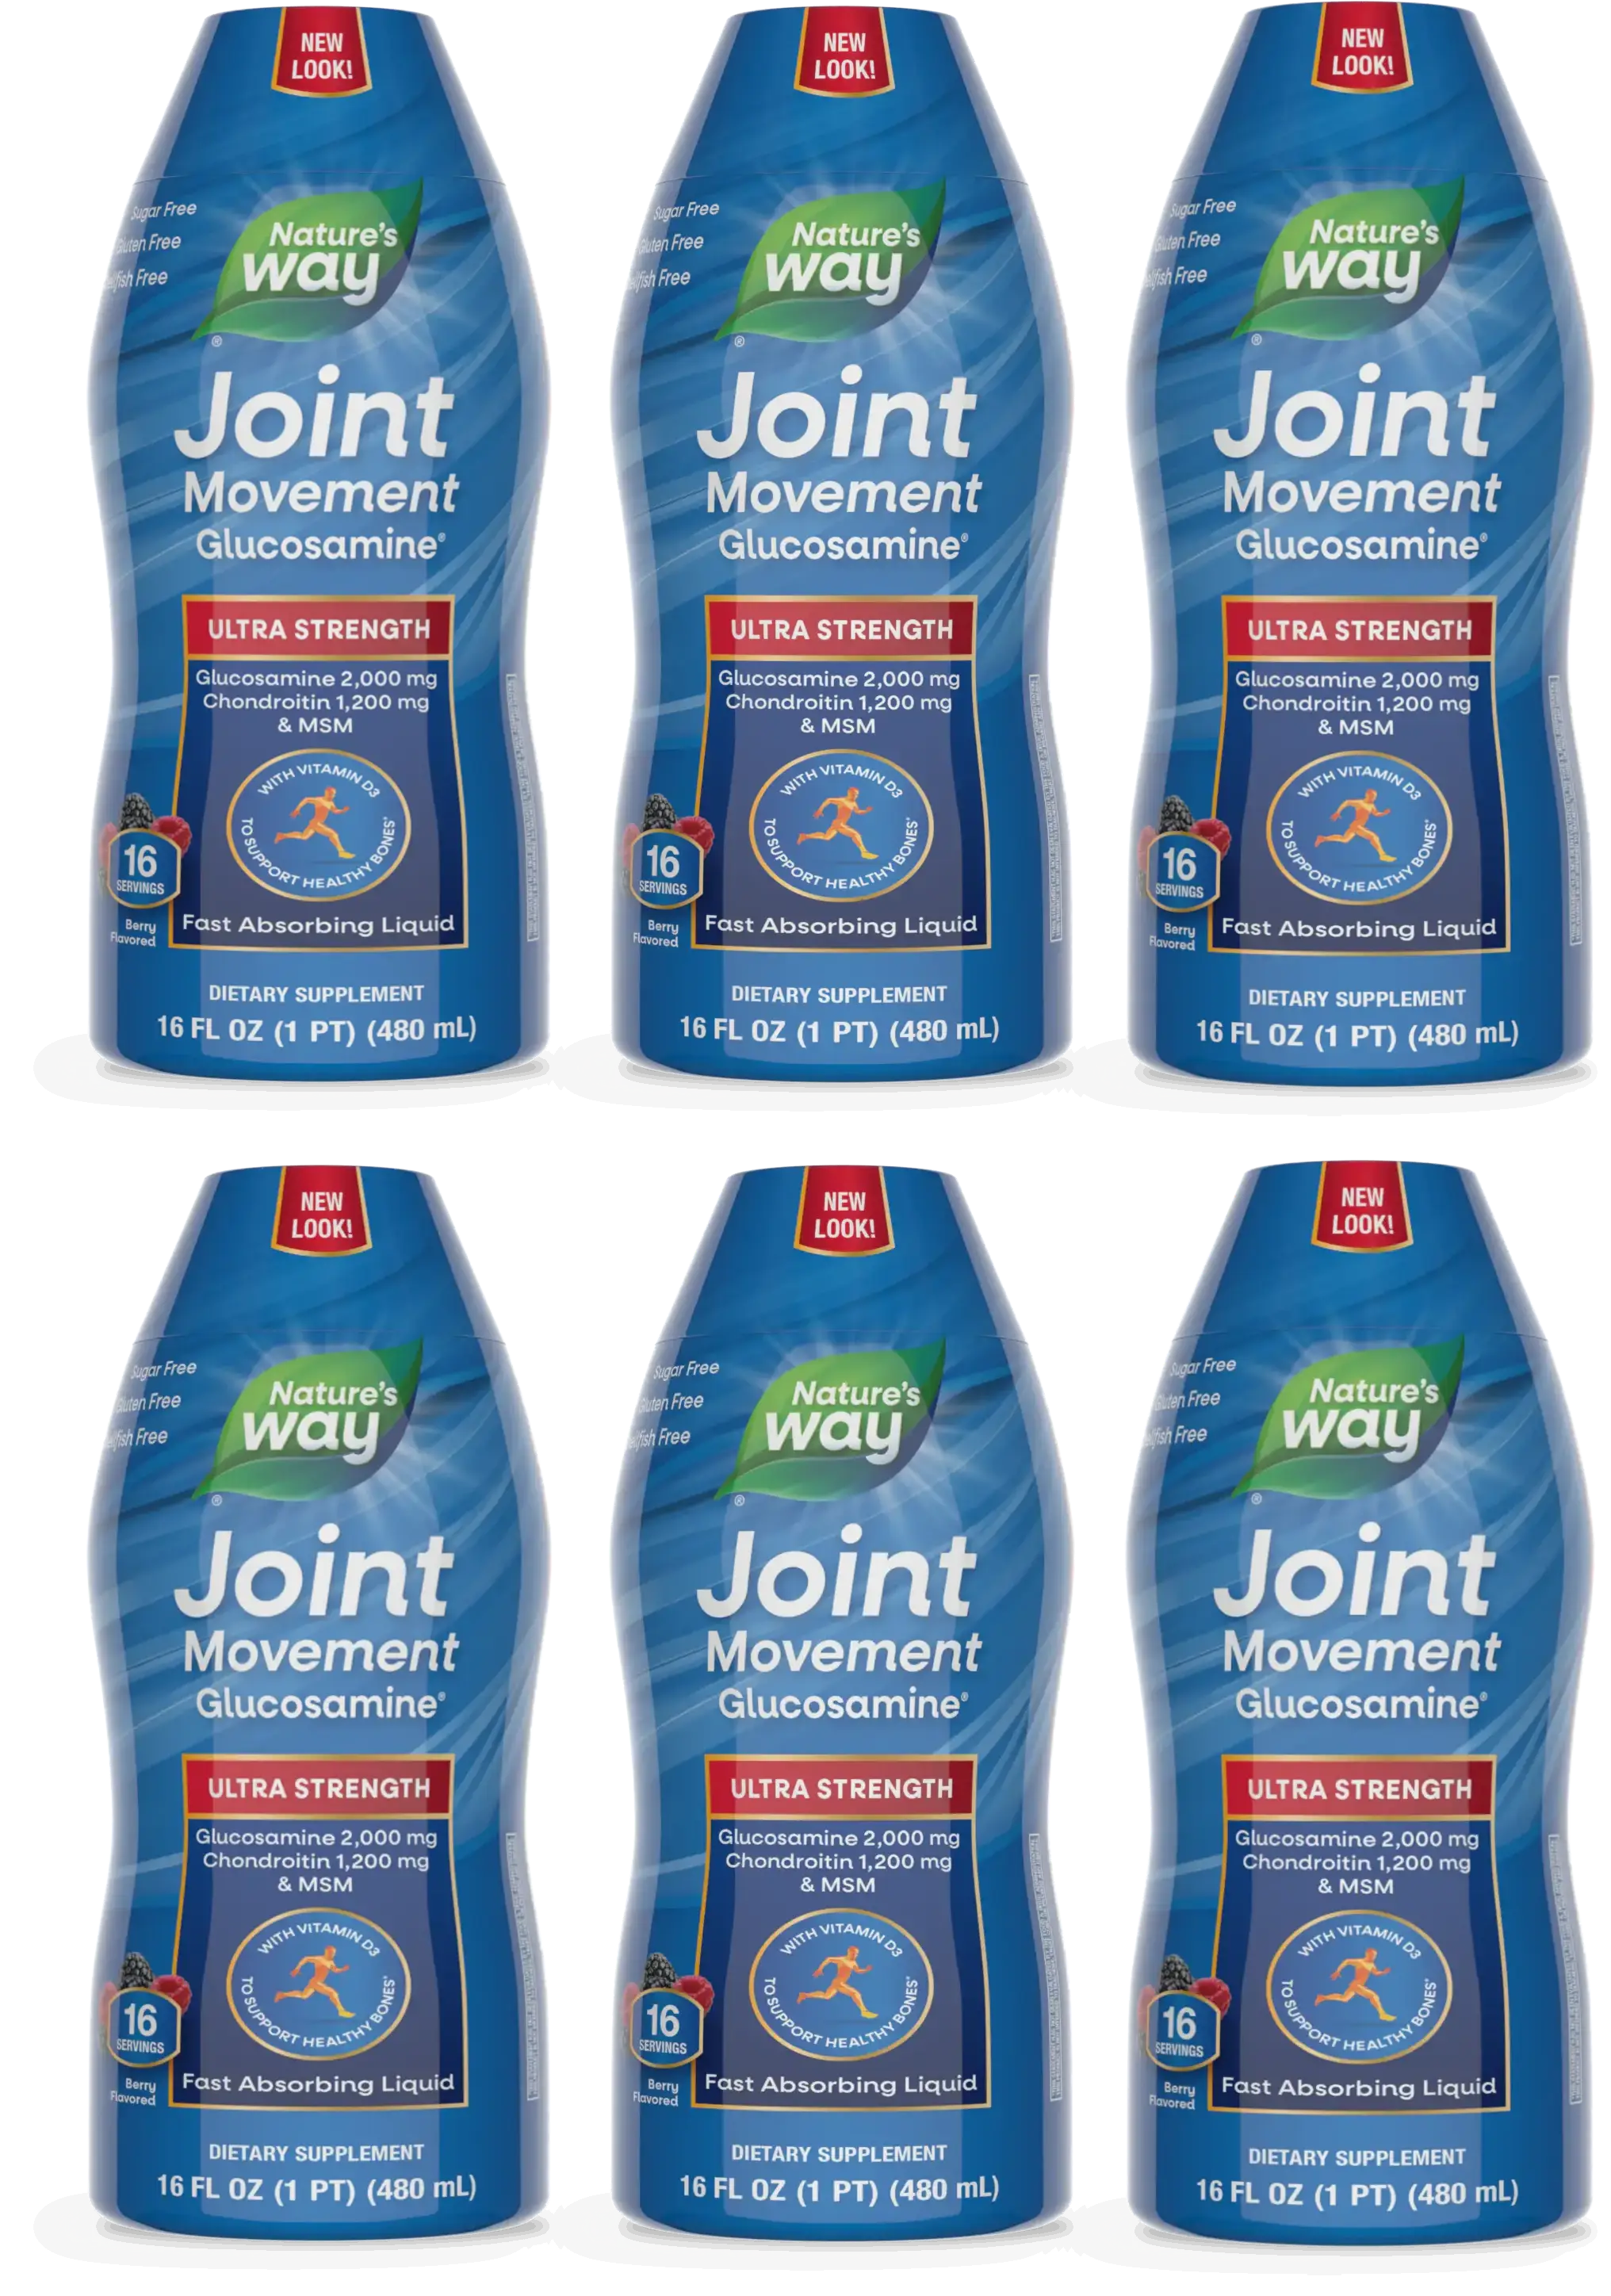 Joint Movement Glucosamine and Chondroitin Liquid by Natures Way - Berry Flavor